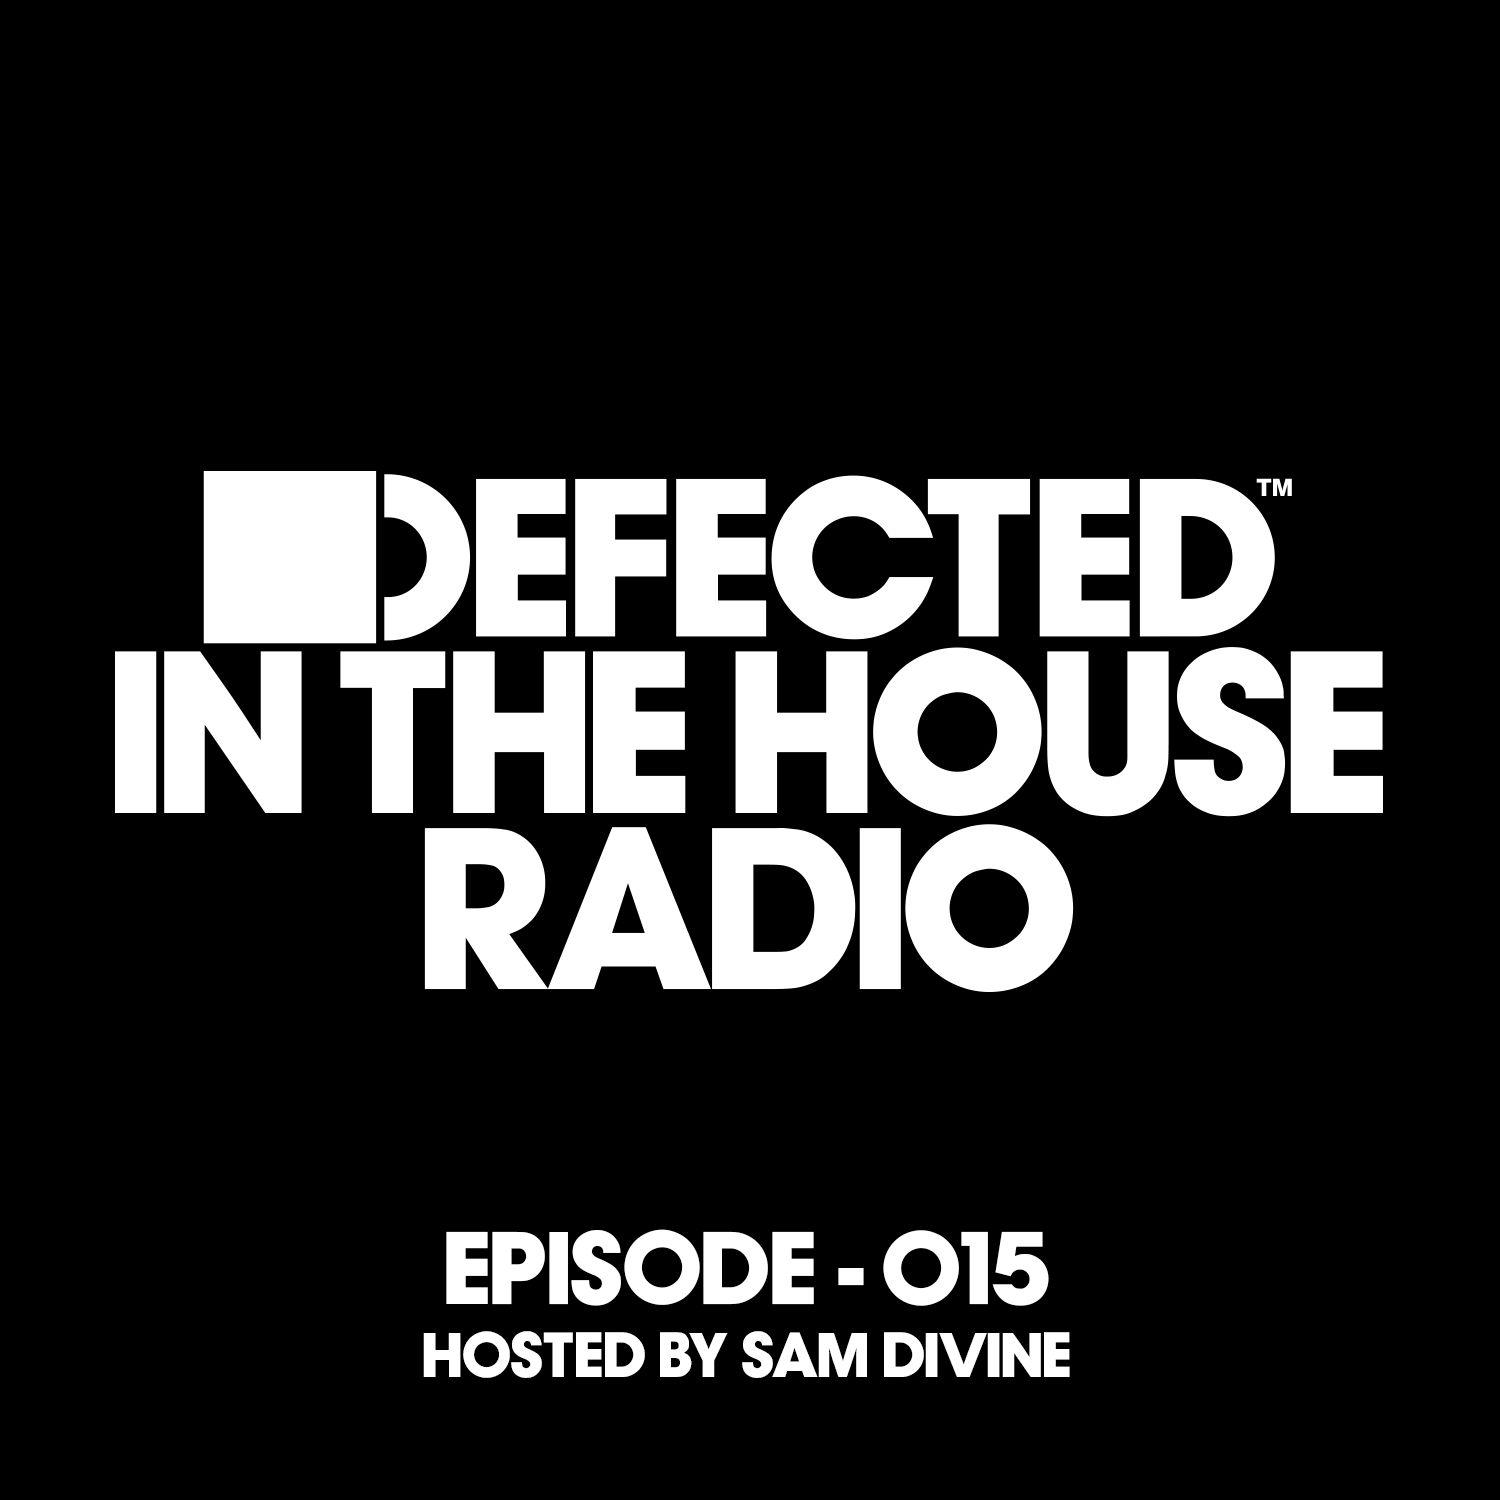 Defected In The House Radio Show Episode 015 (hosted by Sam Divine) [Mixed]